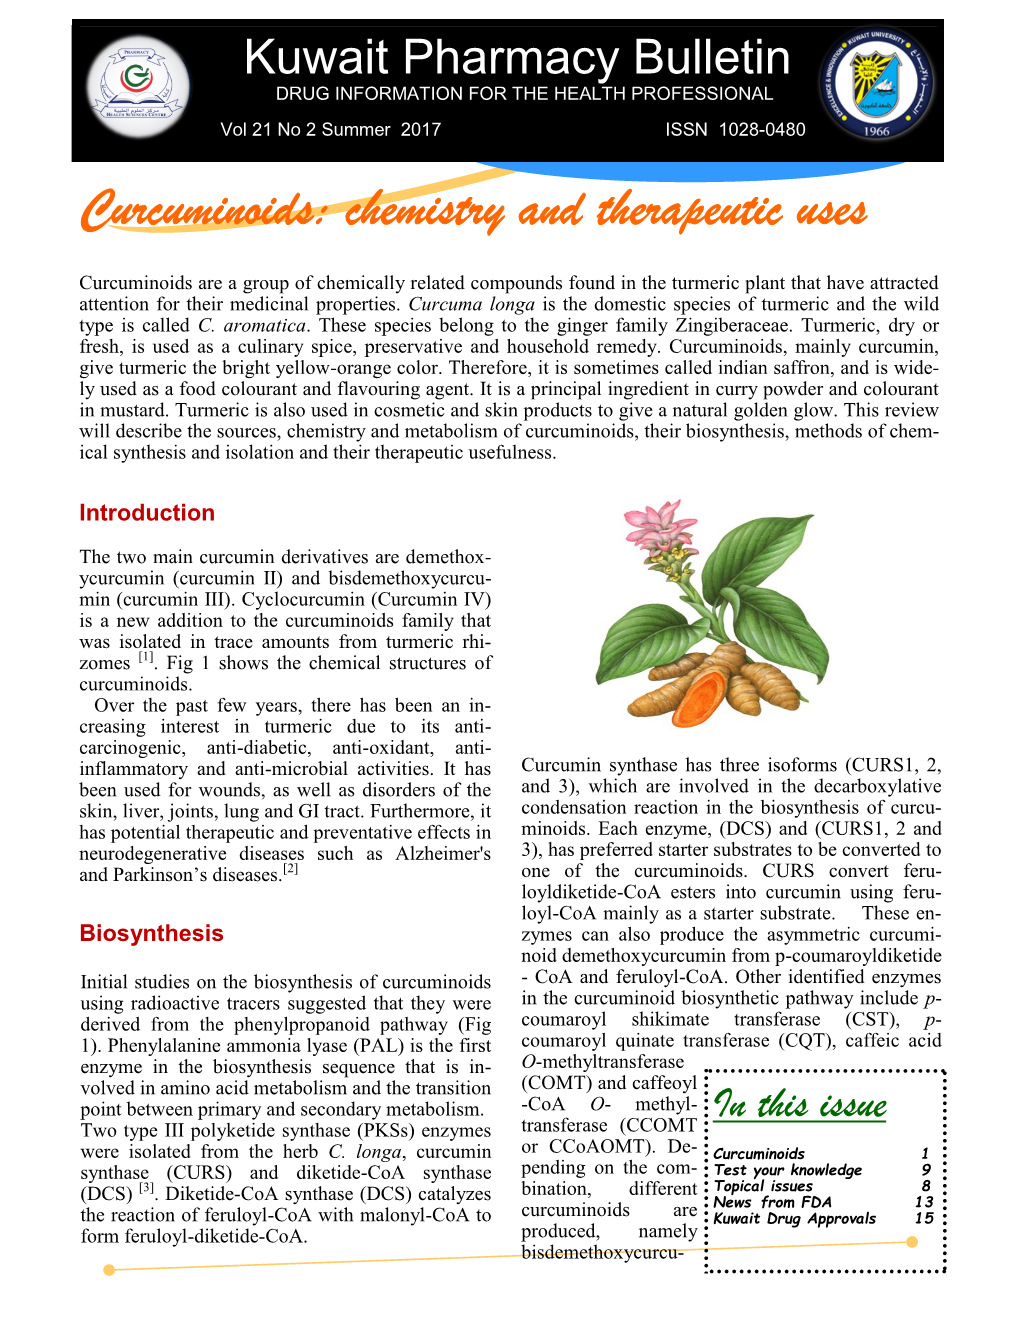 Curcuminoids: Chemistry and Therapeutic Uses